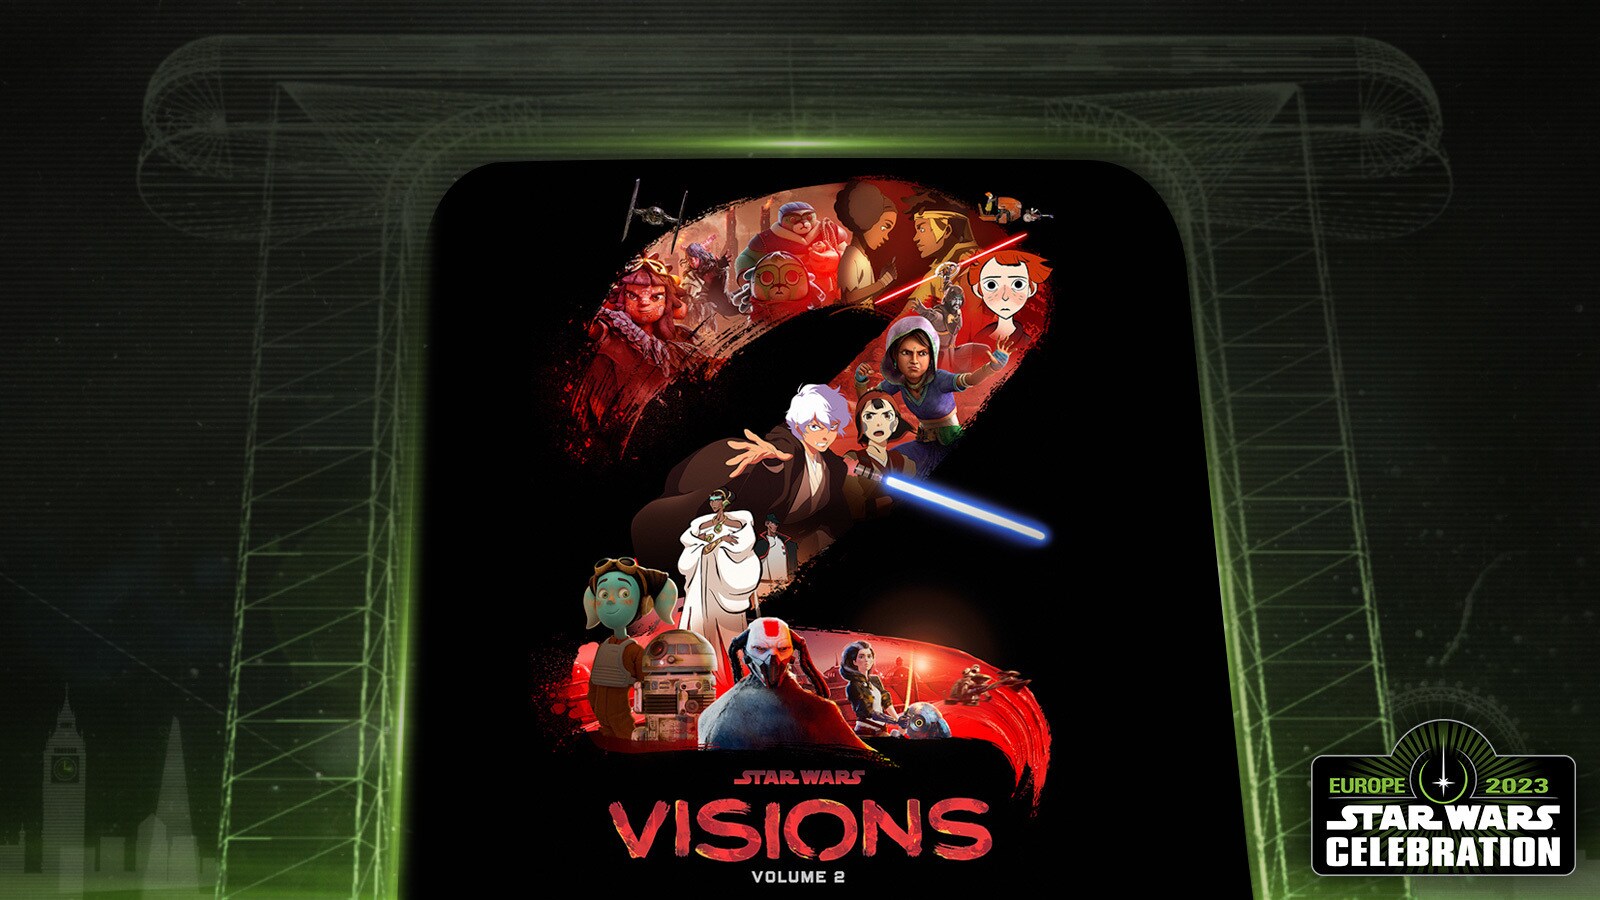  Star Wars Visions Volume 2 Tv Series 2023, Official Trailer